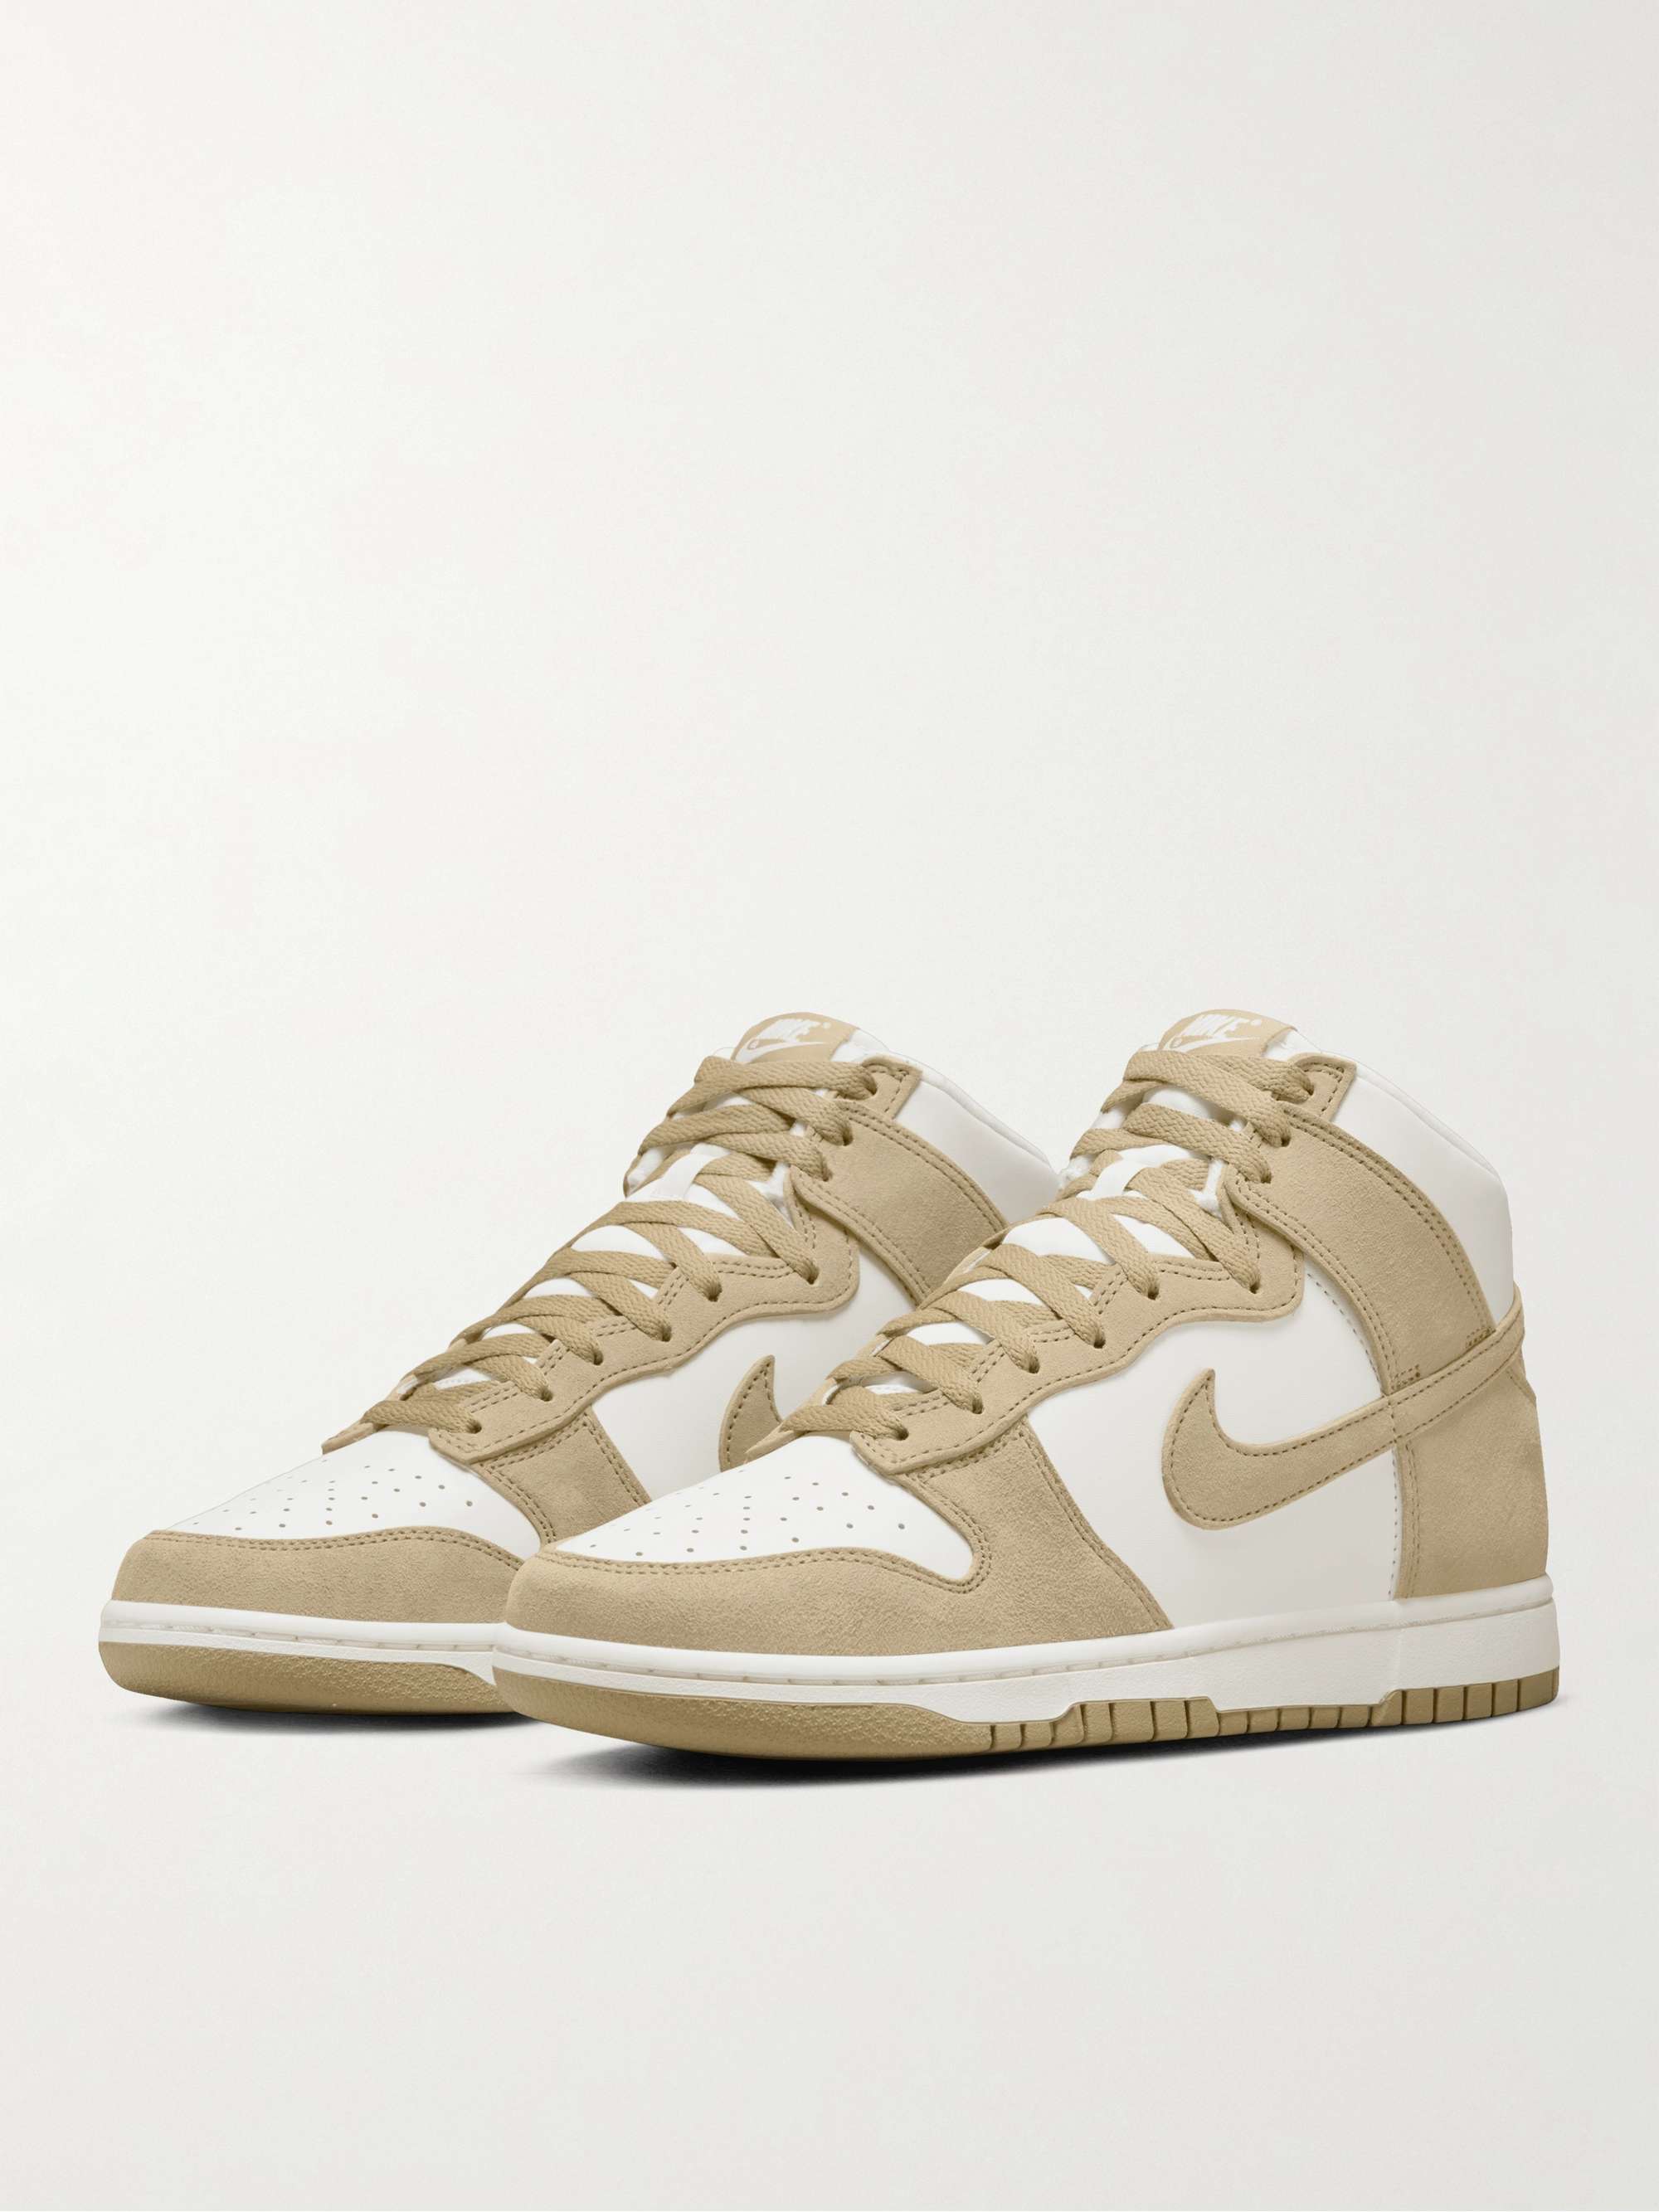 NIKE Dunk High Retro Leather and Suede Sneakers | MR PORTER